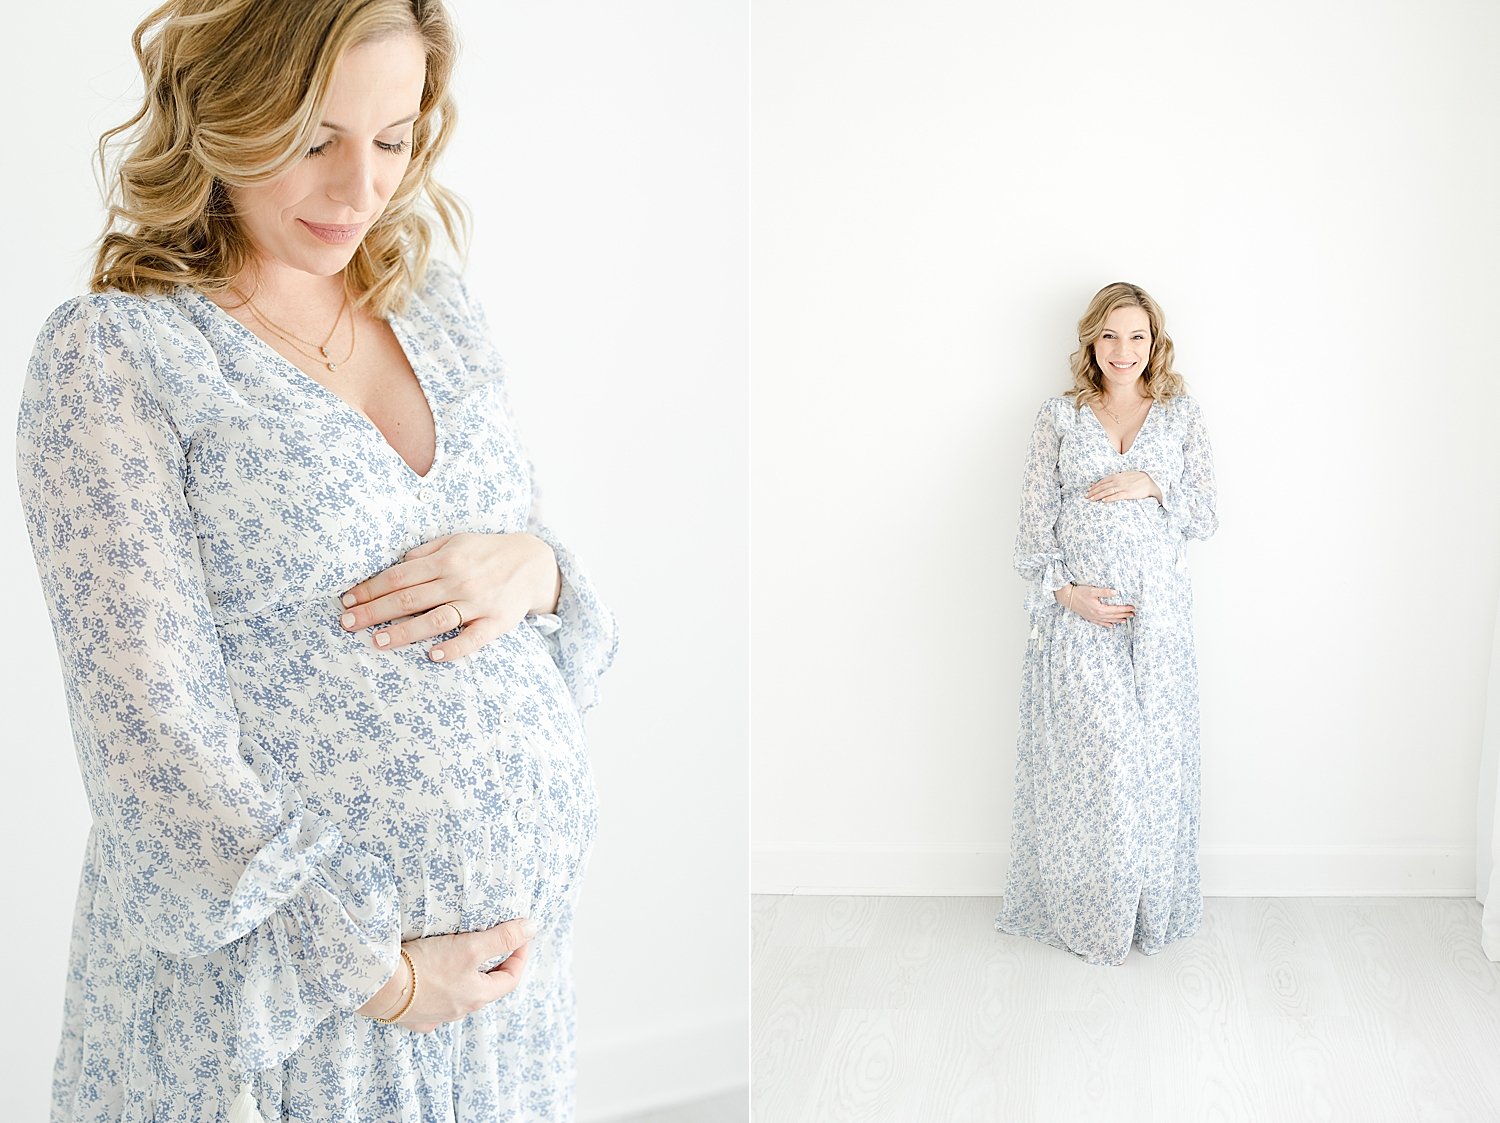 Mom-to-be in beautiful floral blue dress | Kristin Wood Photography